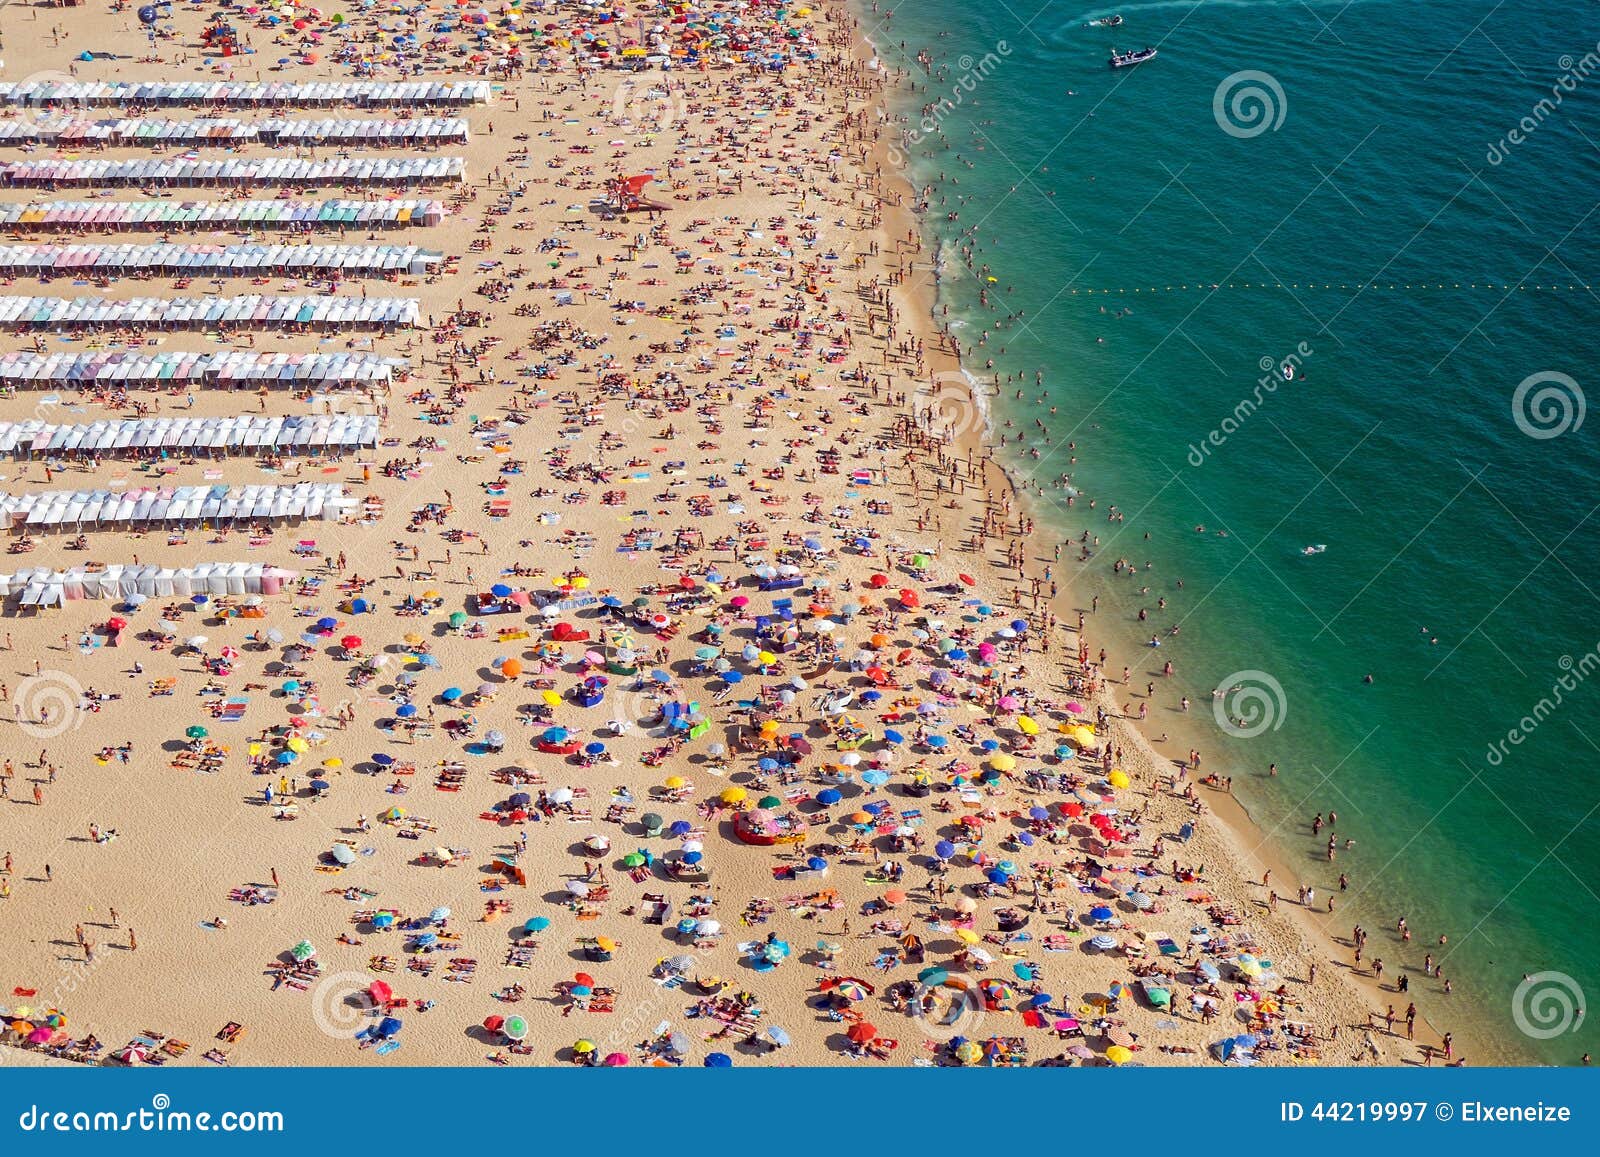 very crowded beach in portugal